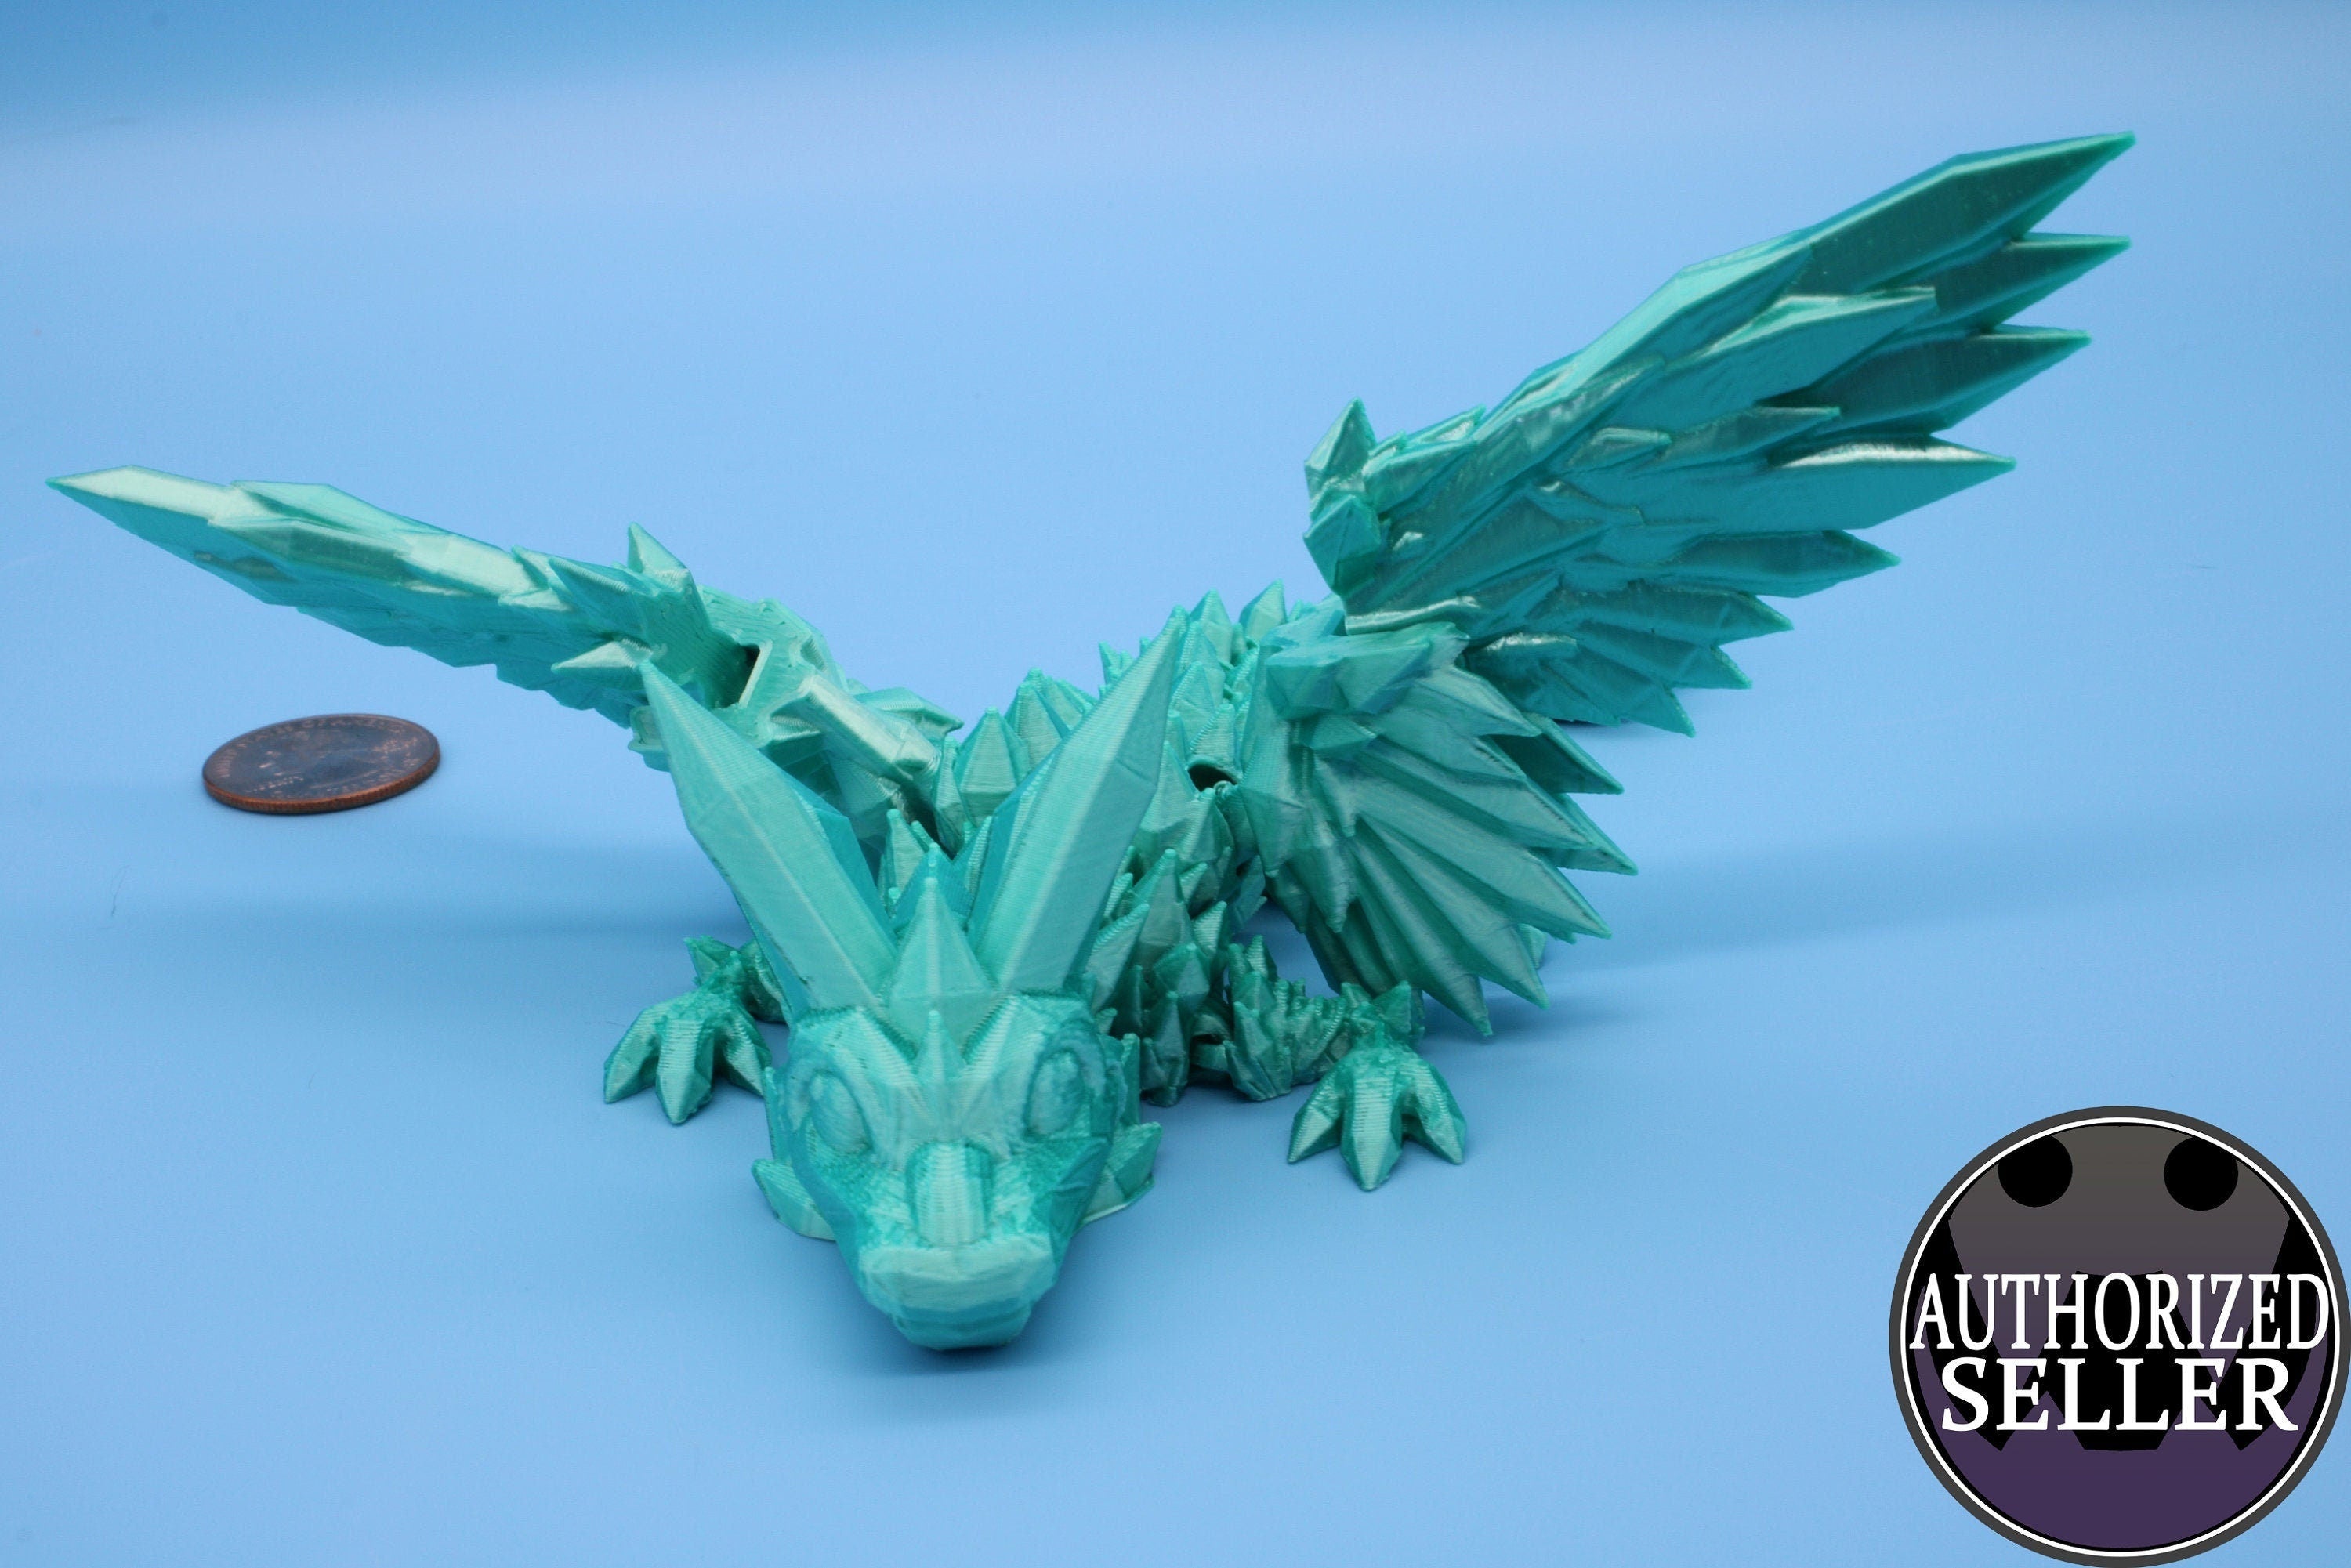 Miniature Teal Crystal Winged Dragon | 3D printed articulating dragon Fidget | Flexi Toy 7 in. head to tail | Stress Relief Gift